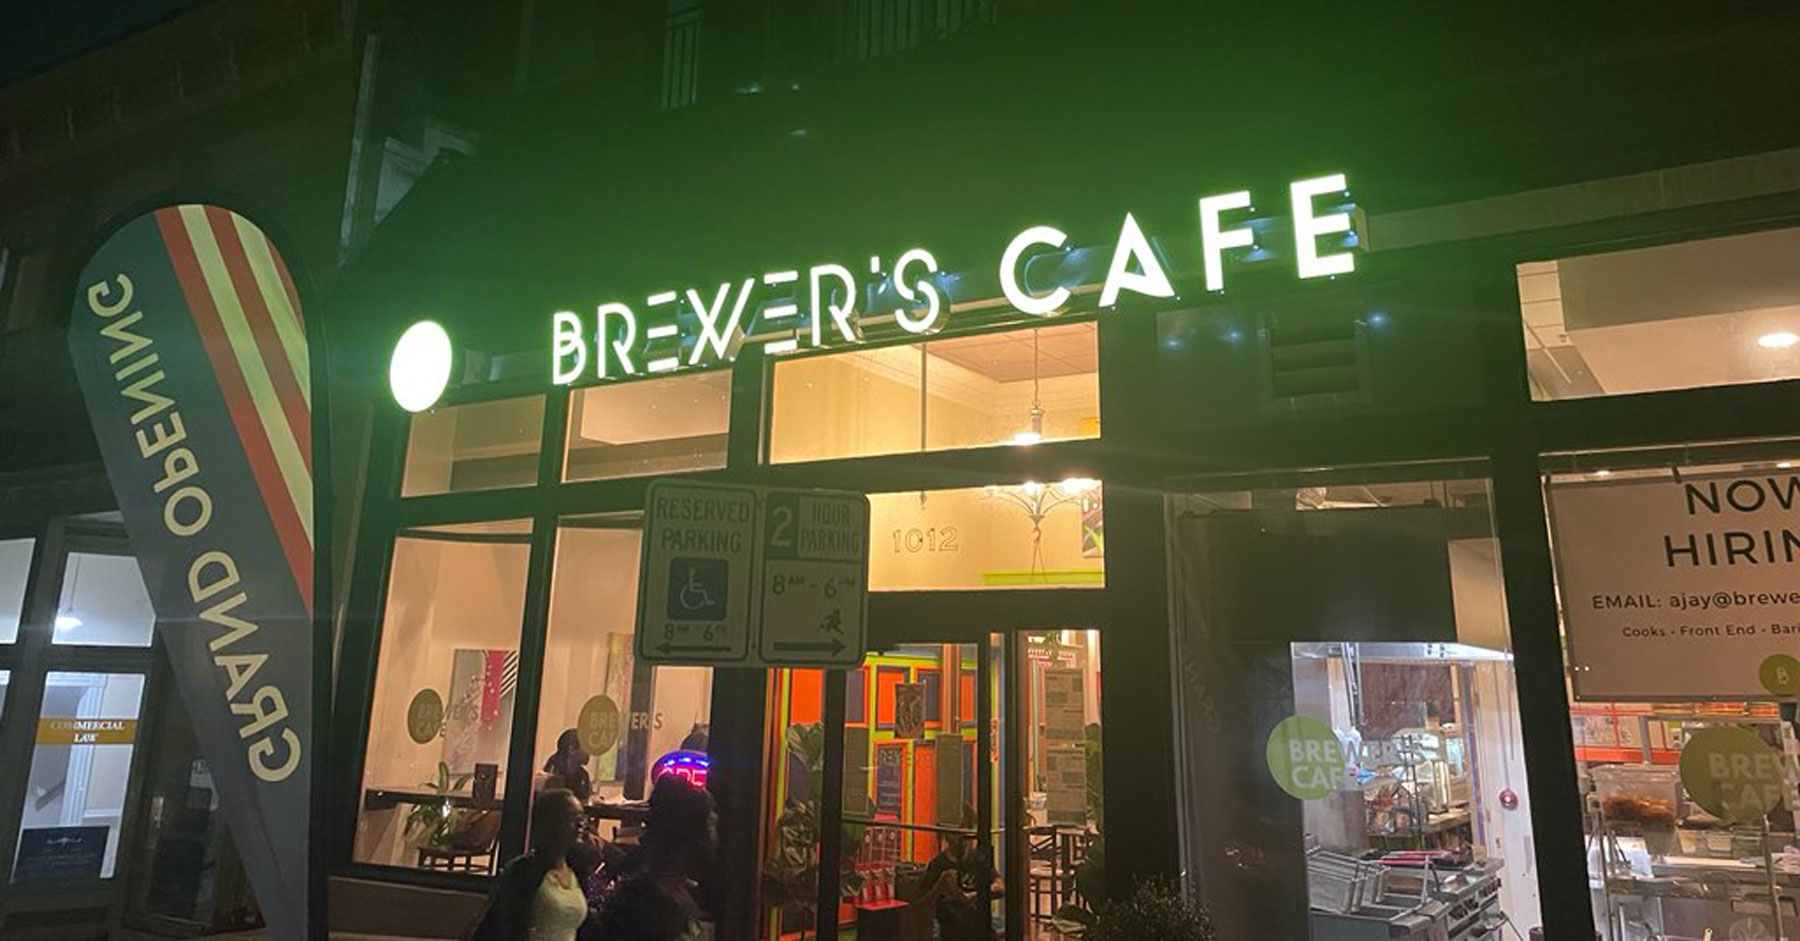 Brewer's Cafe lighted electric sign